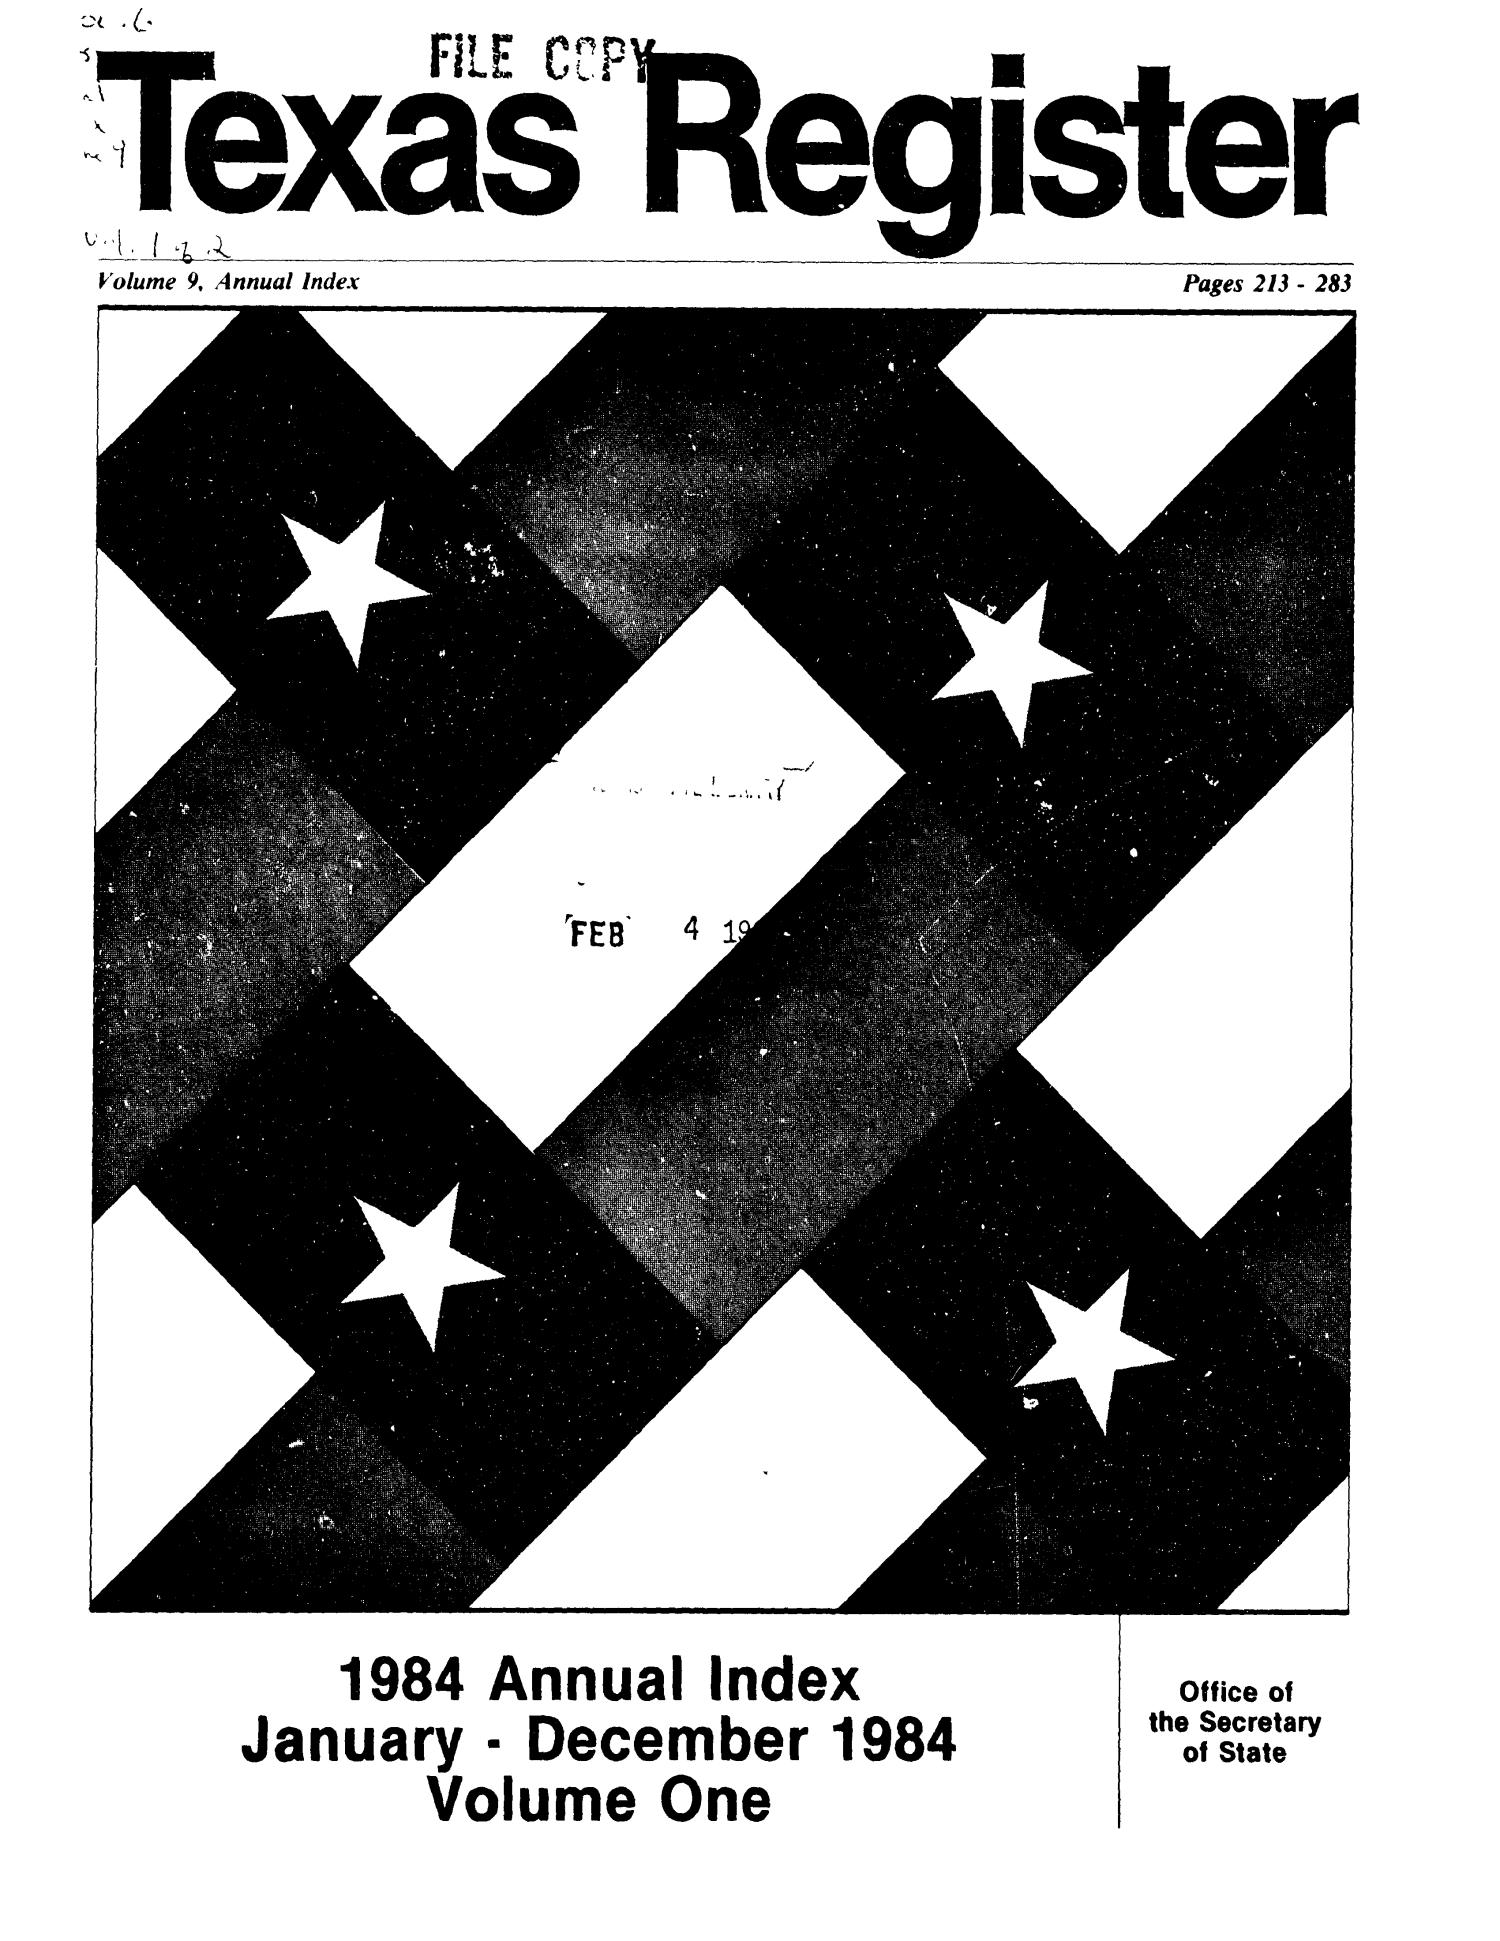 Texas Register: Annual Index January 1984 - December 1984, Volume 9 [Part One], Pages 213-283, February 1, 1985
                                                
                                                    Title Page
                                                